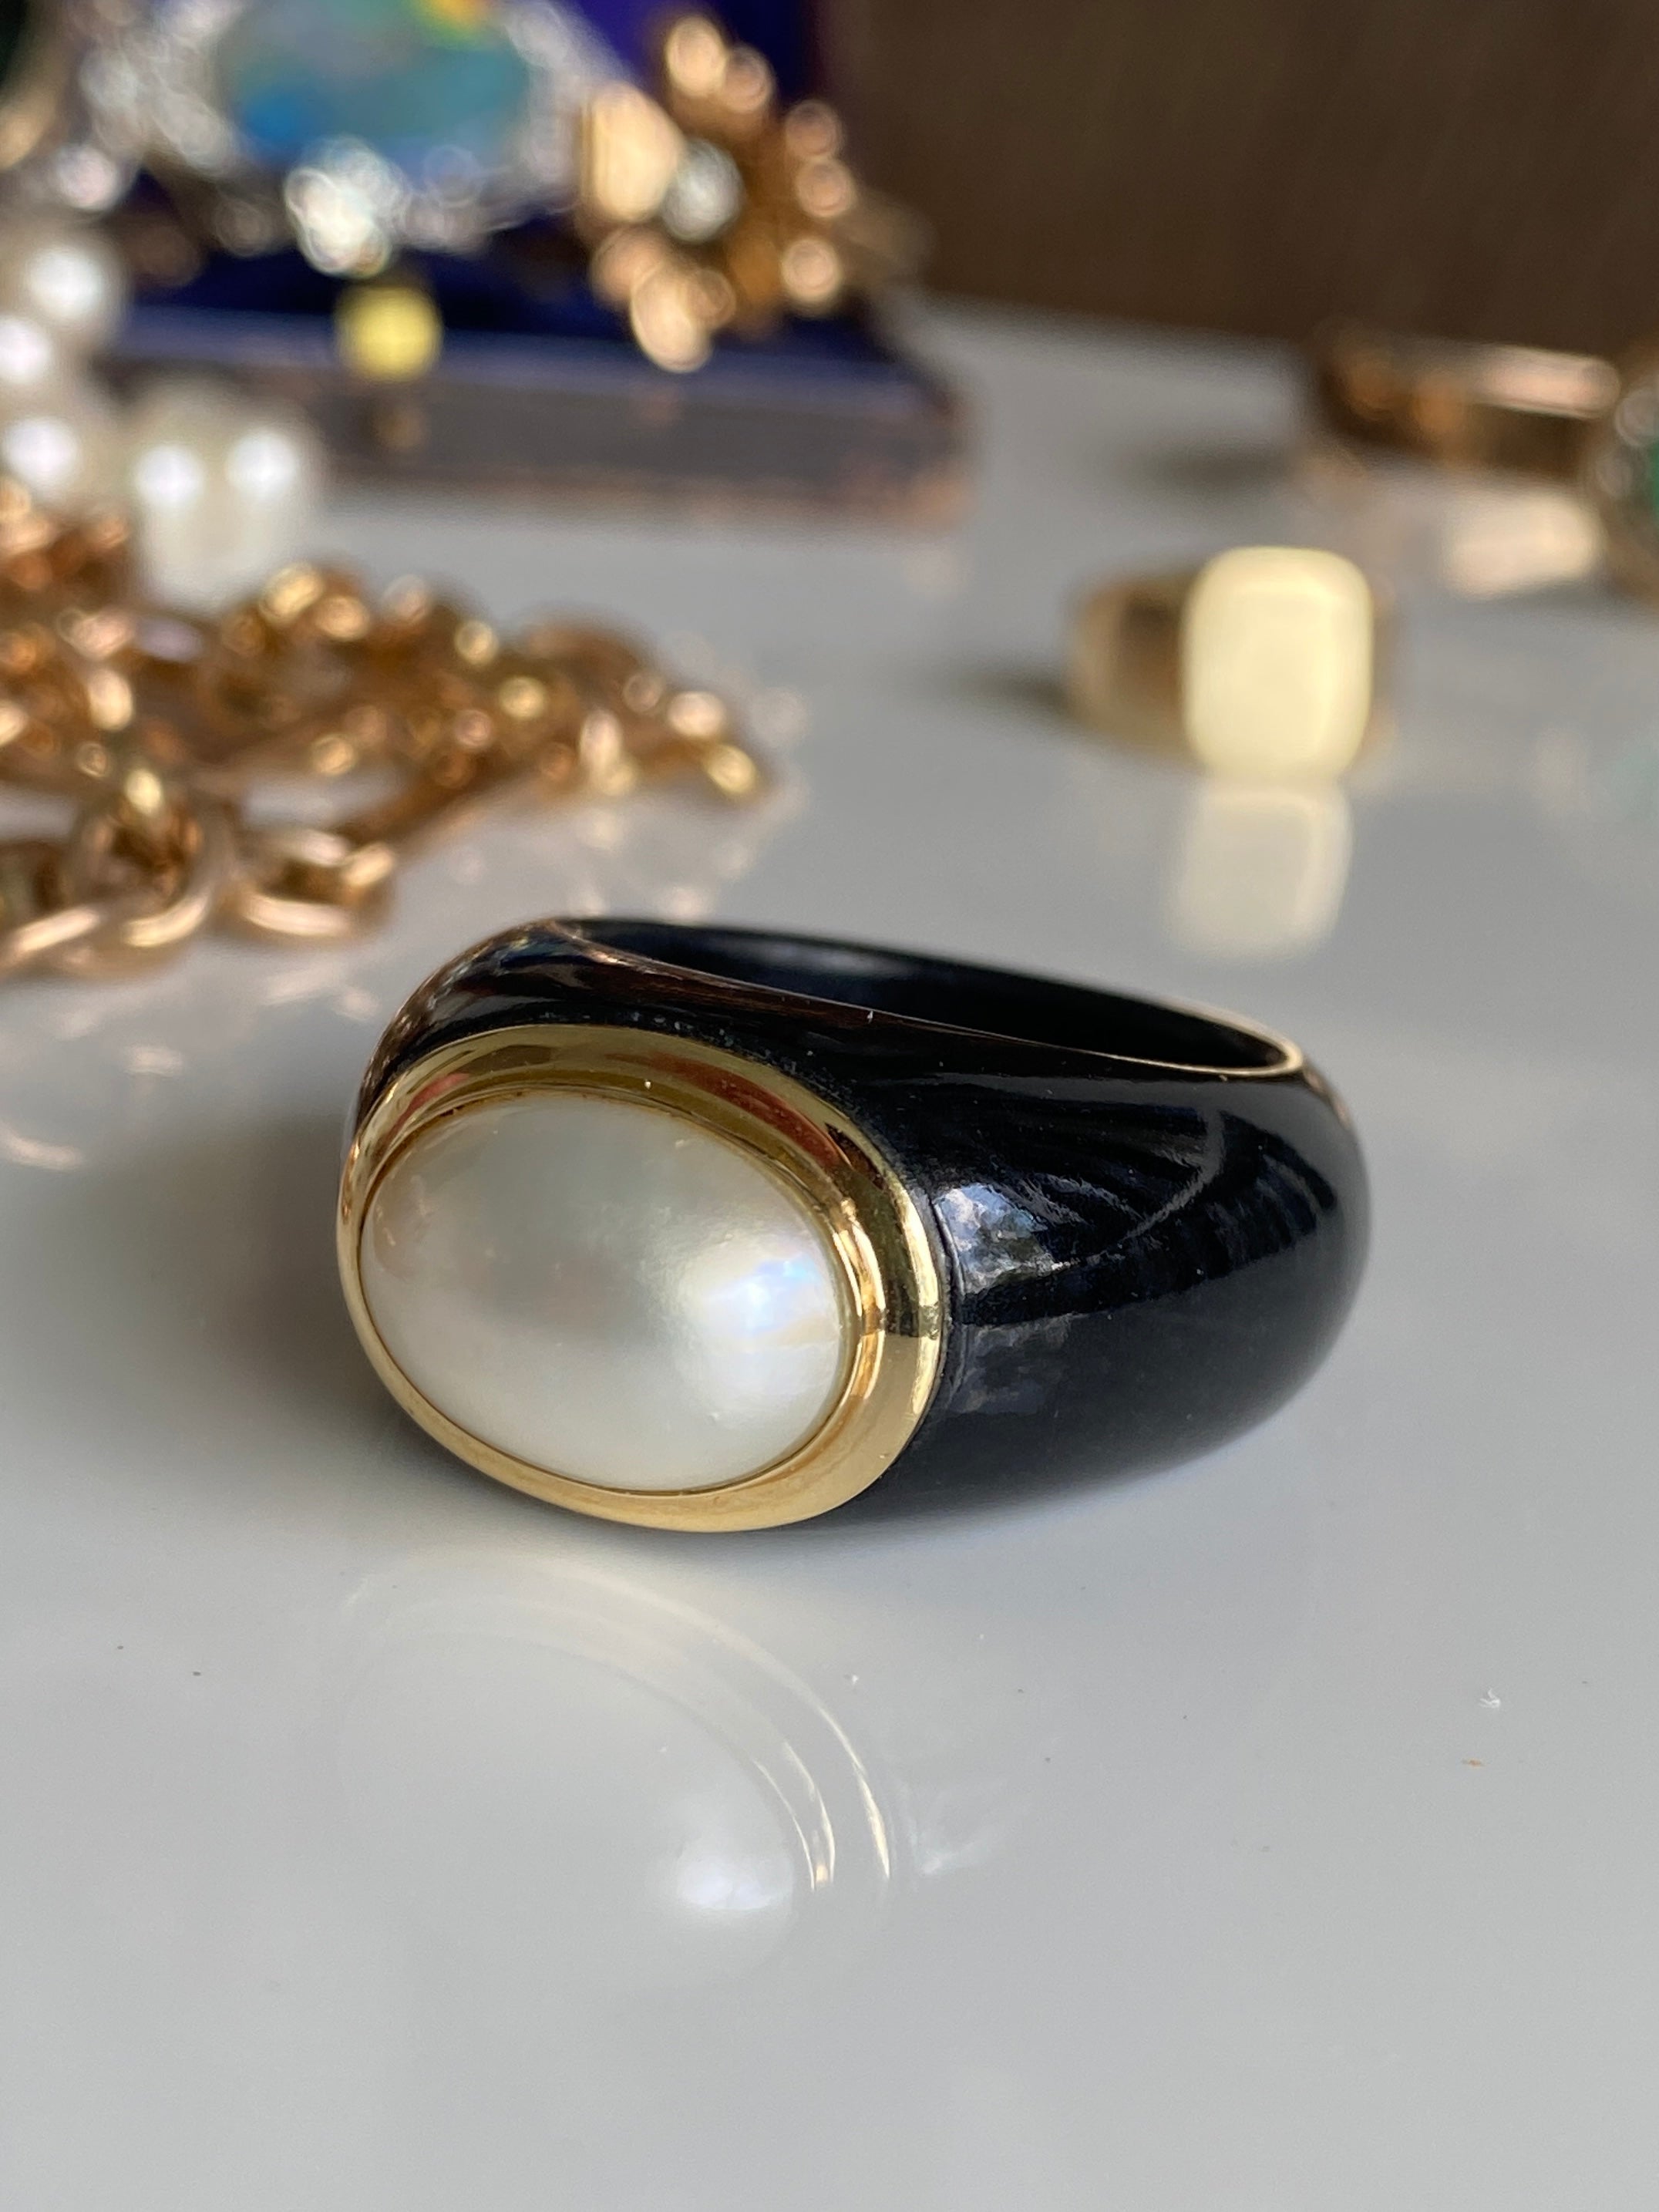 Mabe Pearl & Onyx Ring